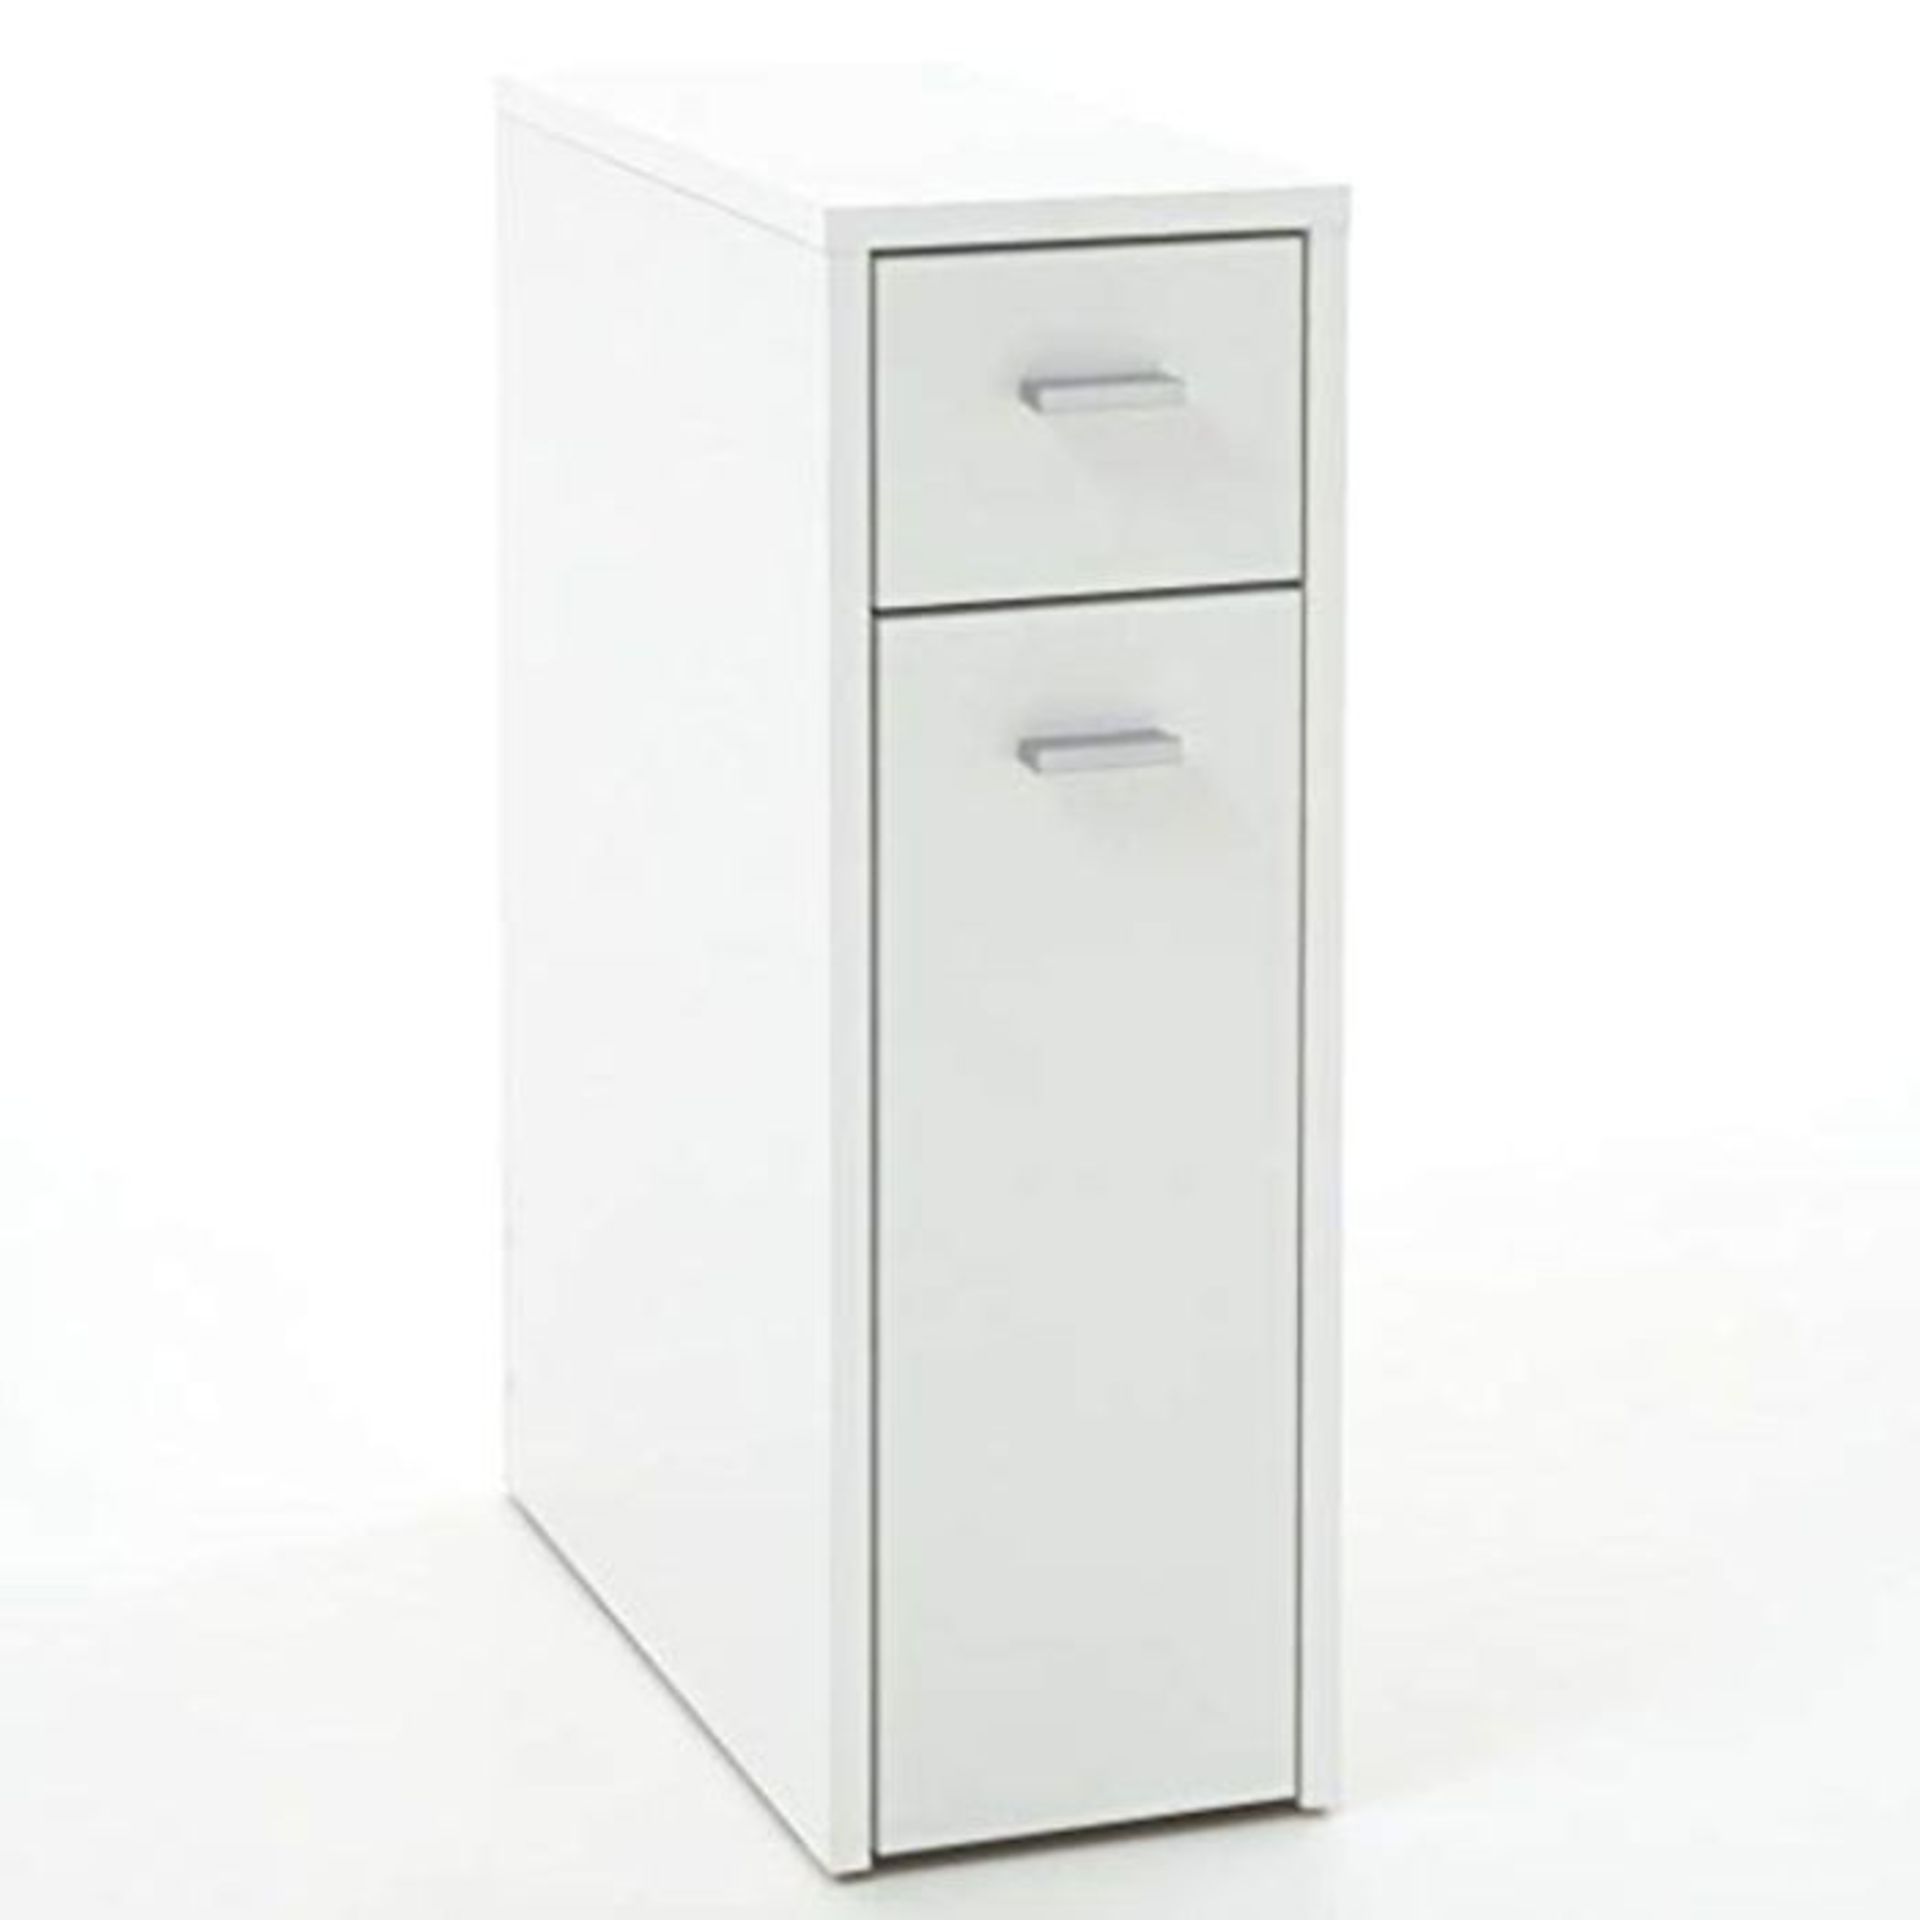 13Casa Nora A5 Multipurpose Cabinet, Material Particleboard / Melamine / Wood, White,